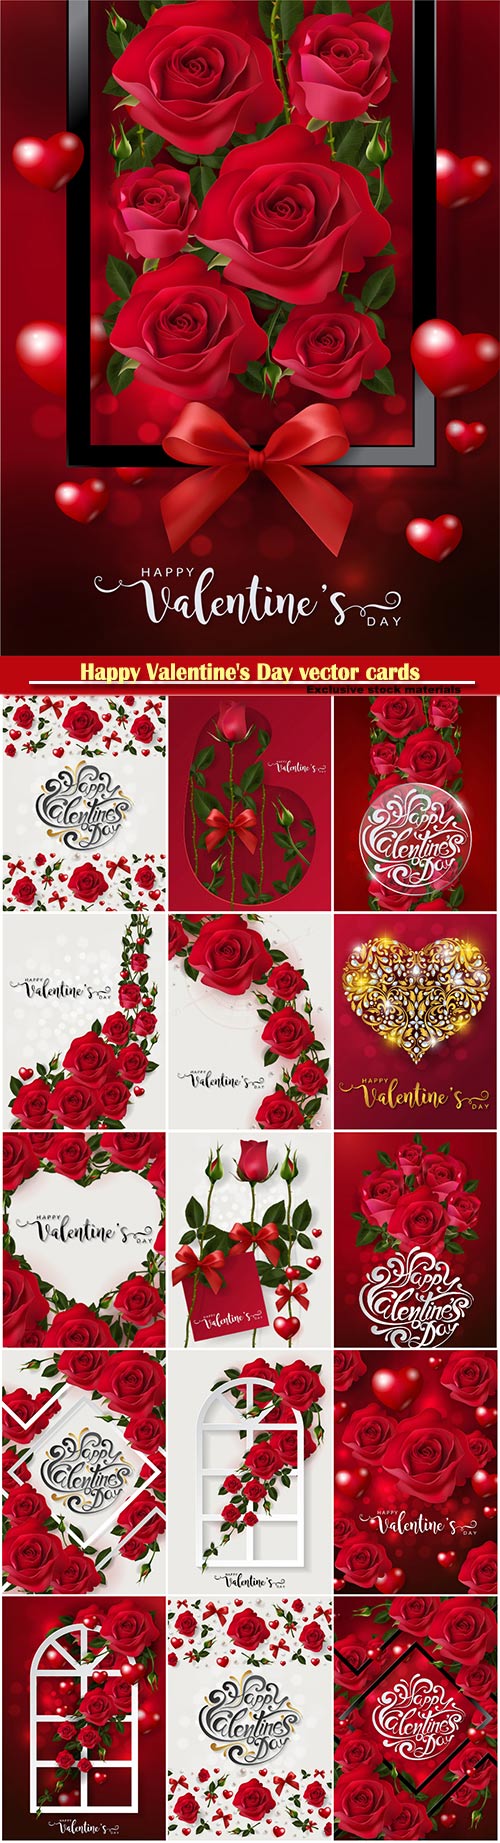 Happy Valentine's Day vector cards, red roses and hearts, romantic backgrounds # 4